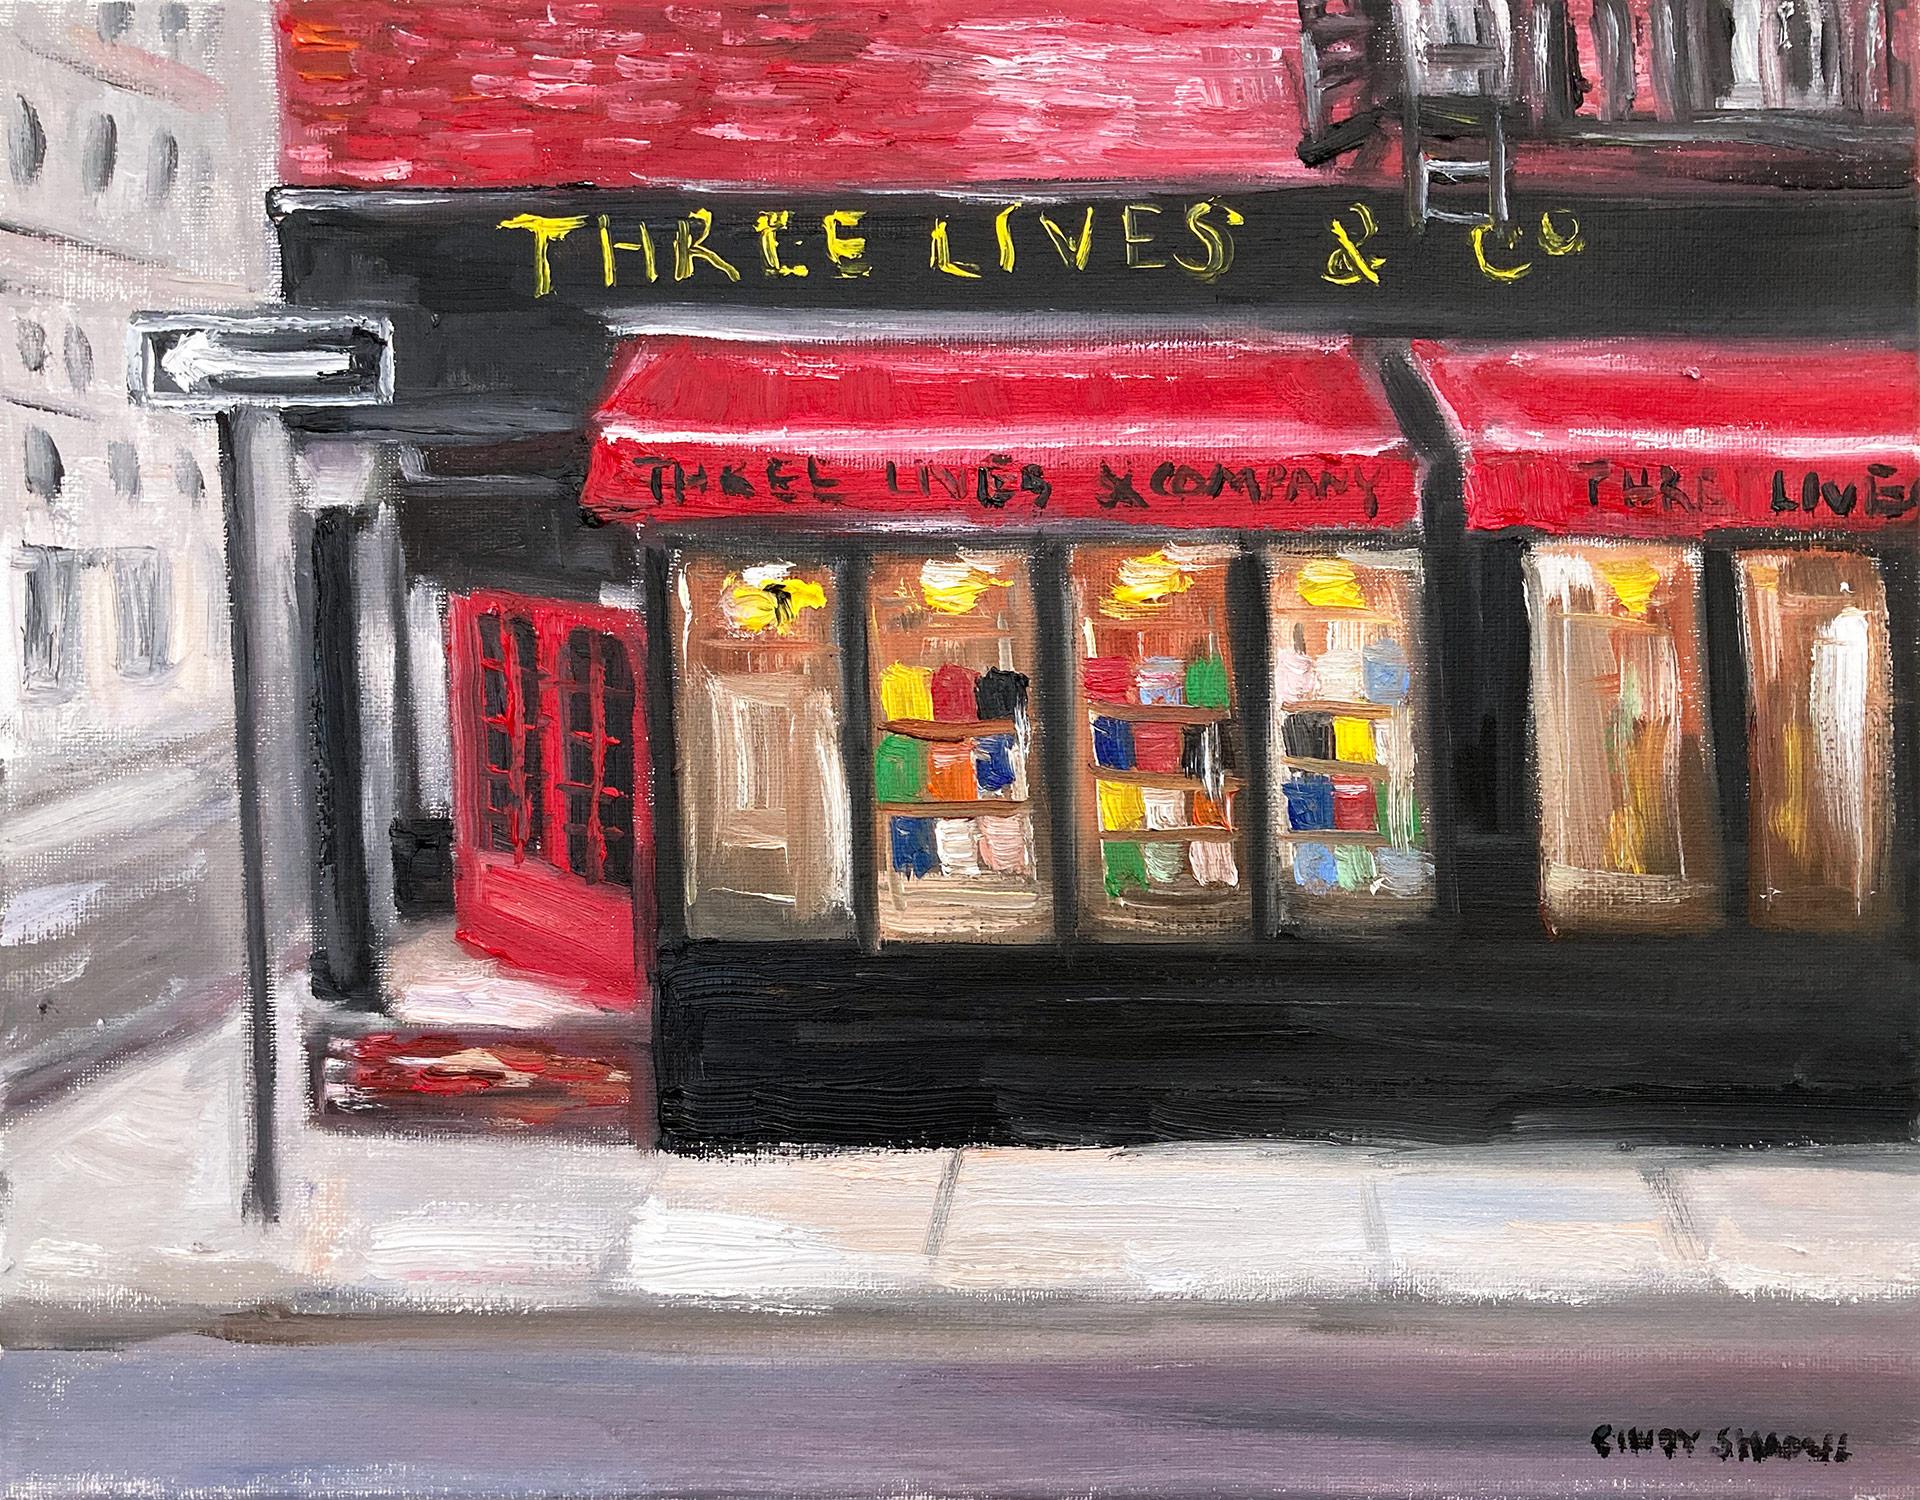 Cindy Shaoul Figurative Painting - "Three Lives & Company" West Village Book Store Street Scene in New York City